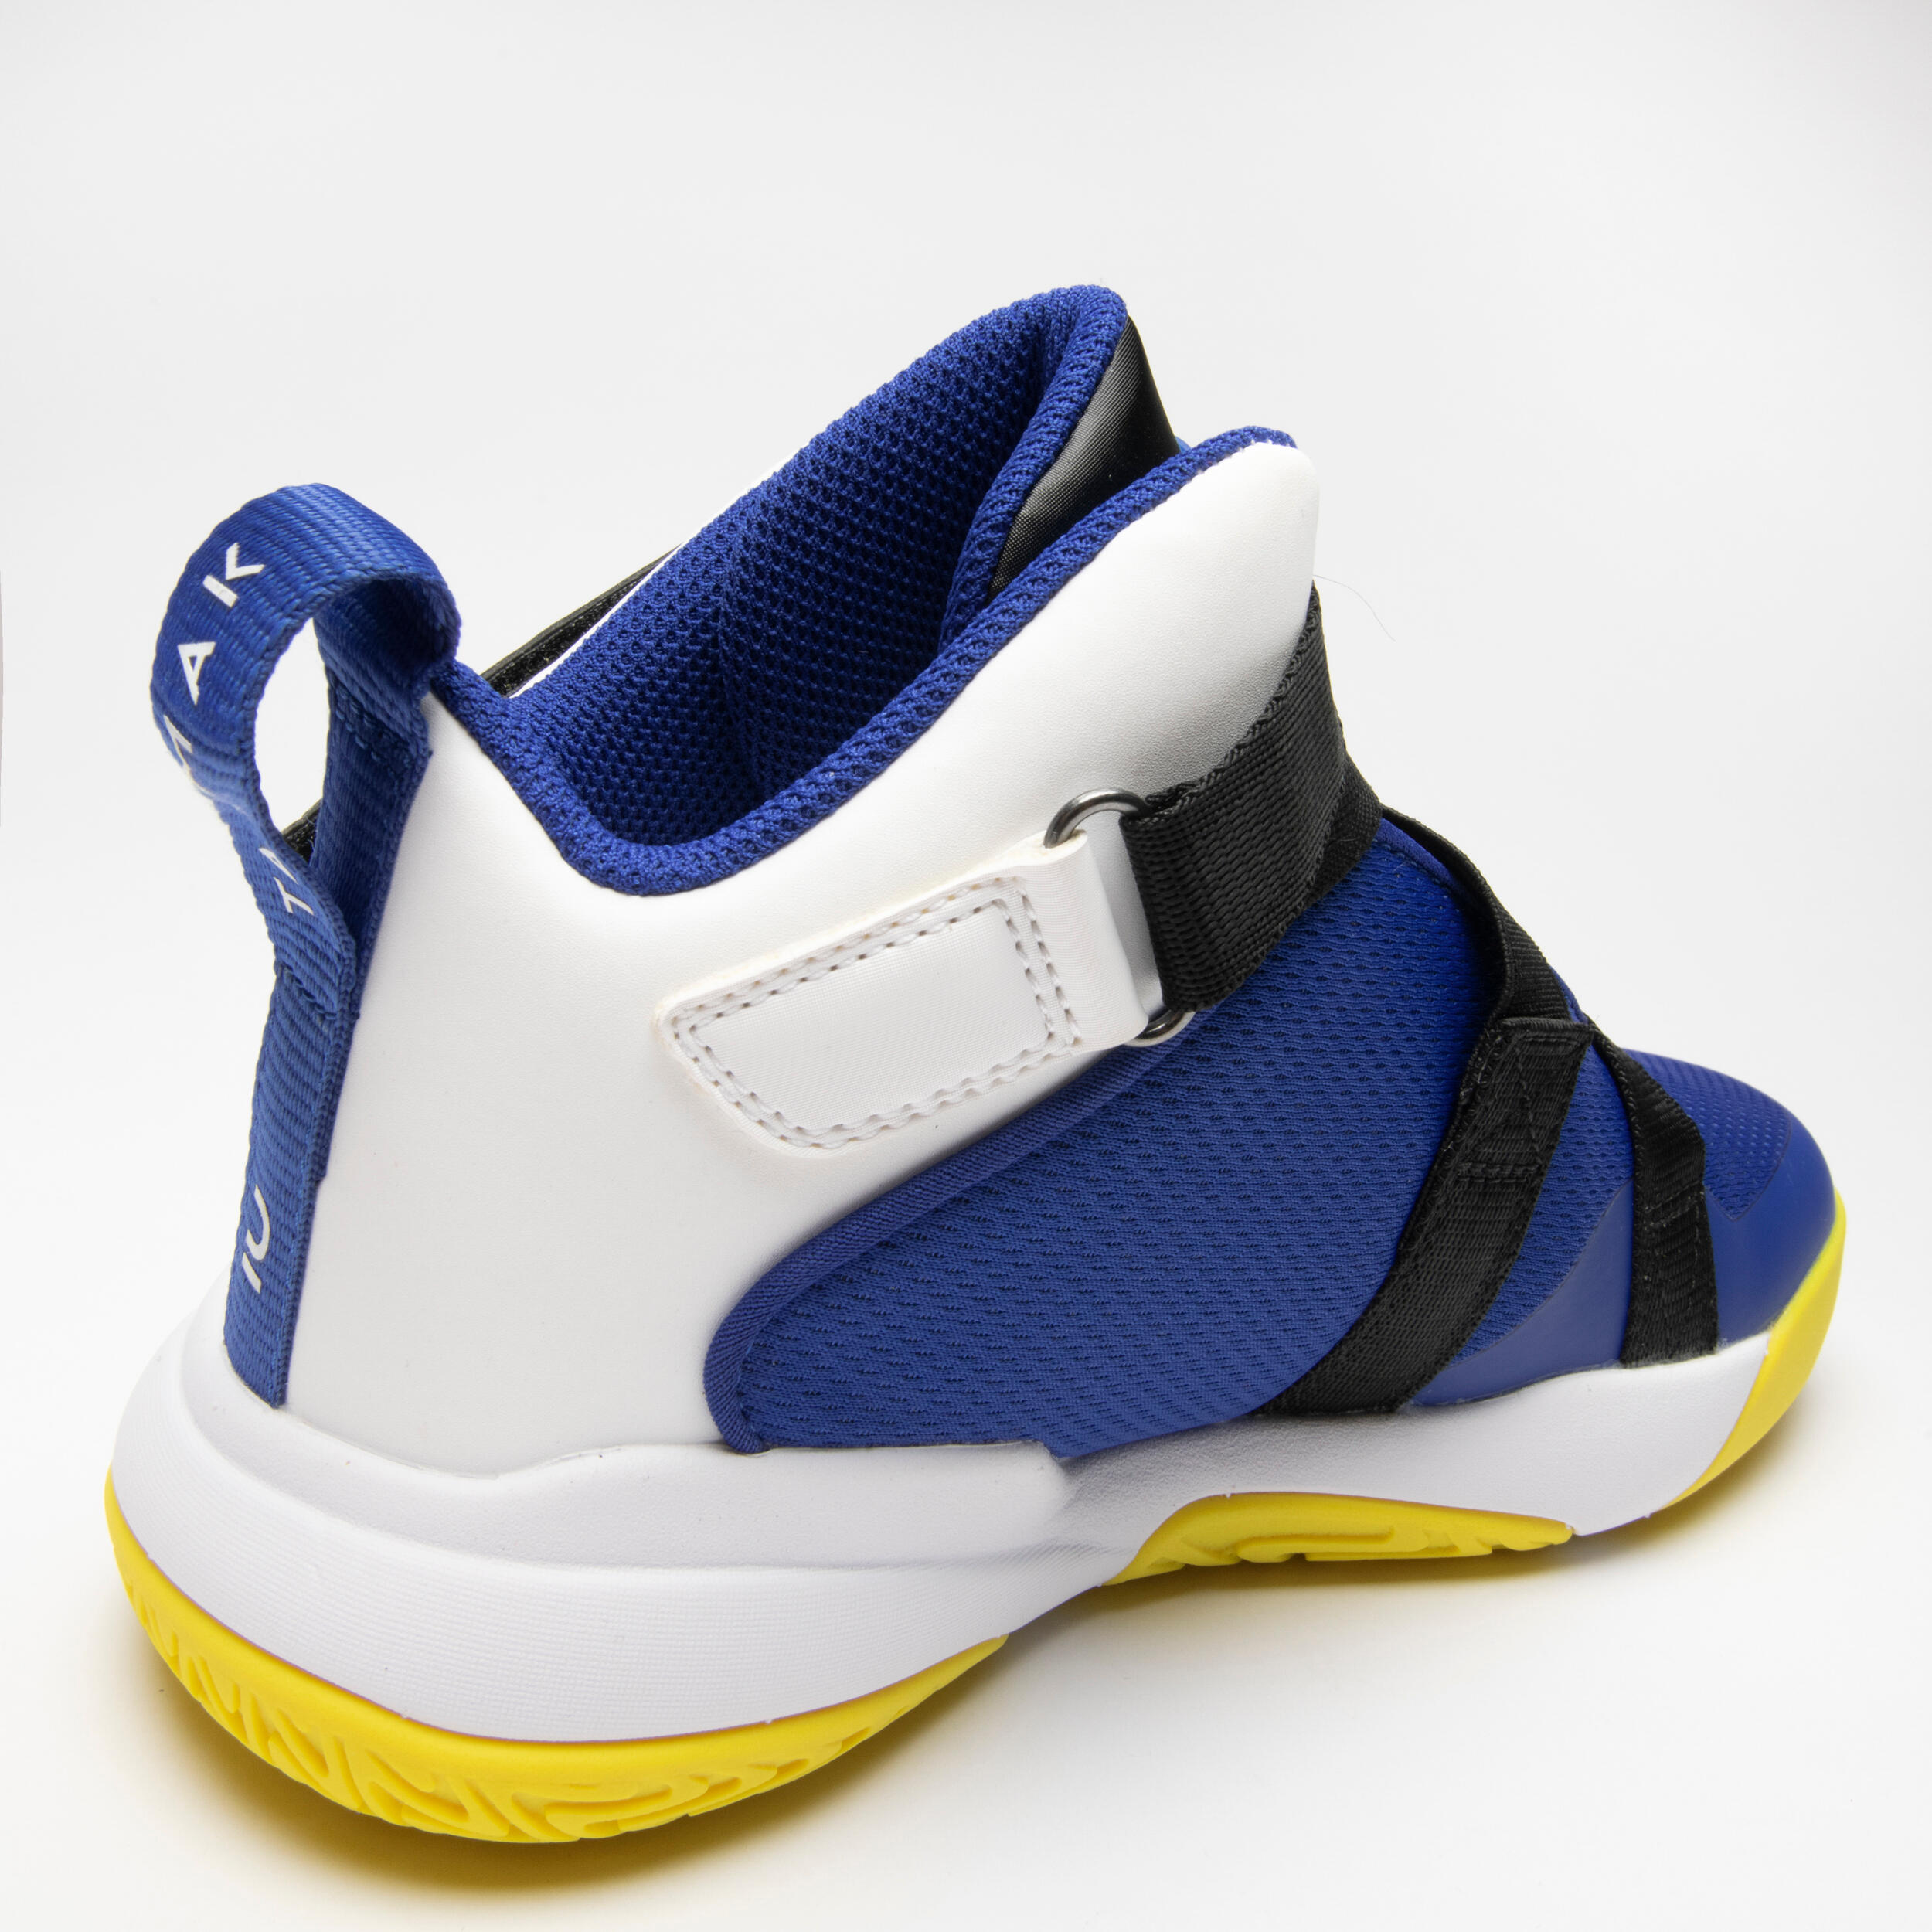 Kids' Basketball Shoes Easy X - Blue/Yellow 5/8